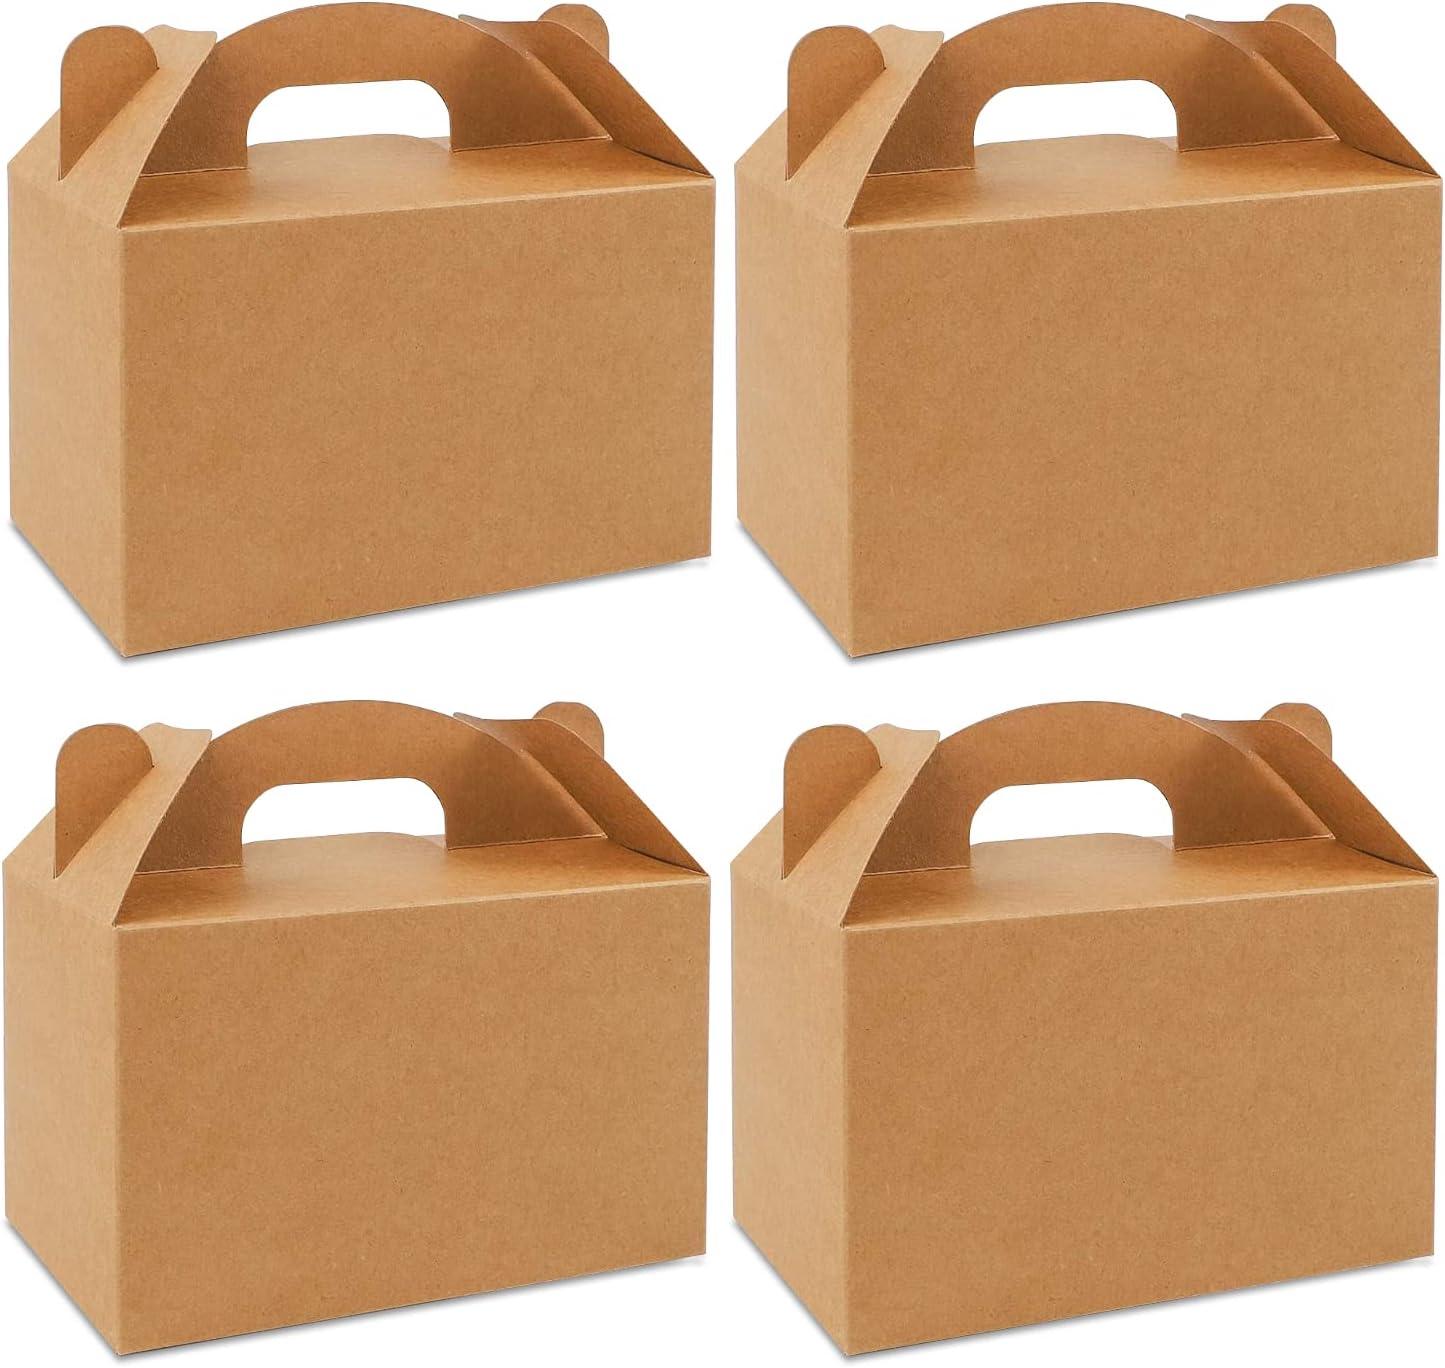 36 Pack Brown Goodies Boxes Dessert/ Treat/ Gable/ Kraft Party Favor Boxes for Keeping Candy, Popcorn - Lasercutwraps Shop